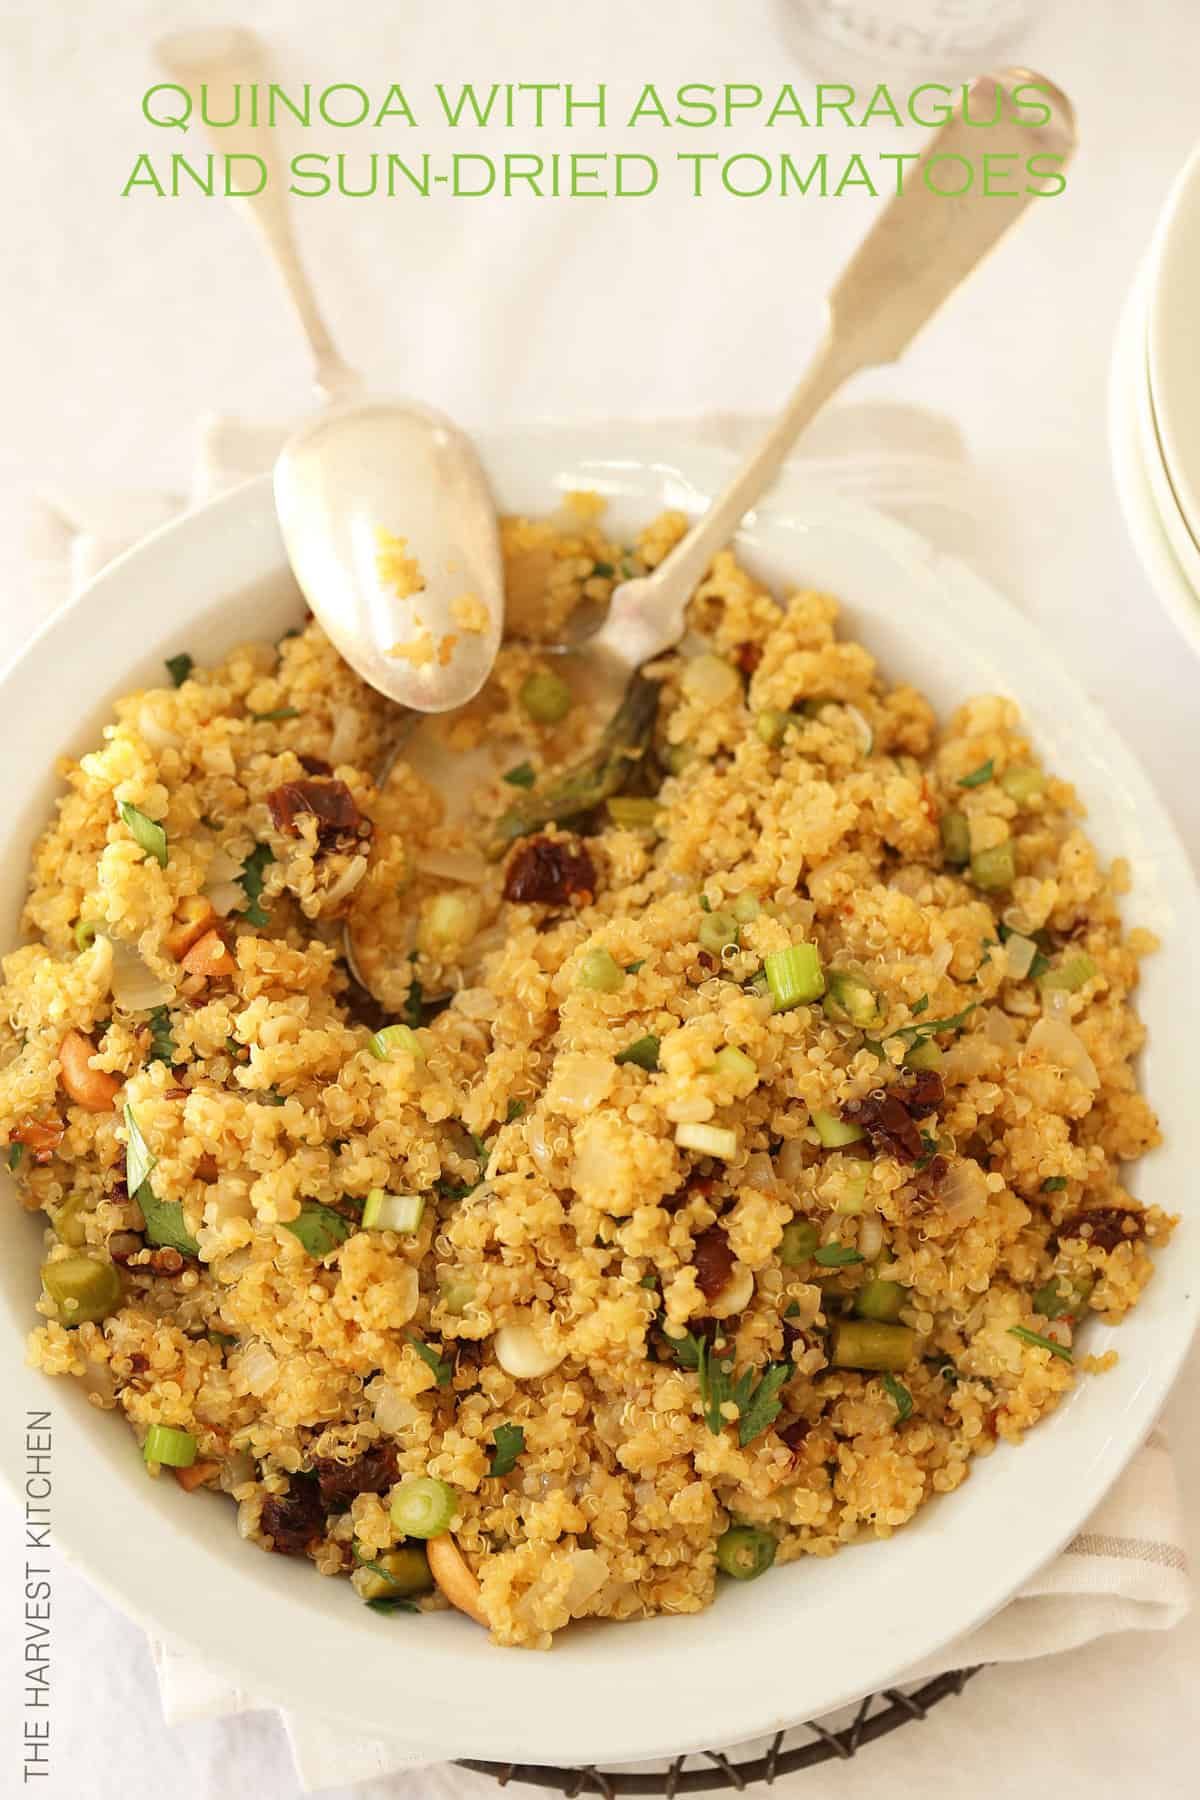 This Quinoa with Asparagus and Sun Dried Tomatoes Side Dish is delicious with grilled chicken or fish and it also makes a delicious vegan main